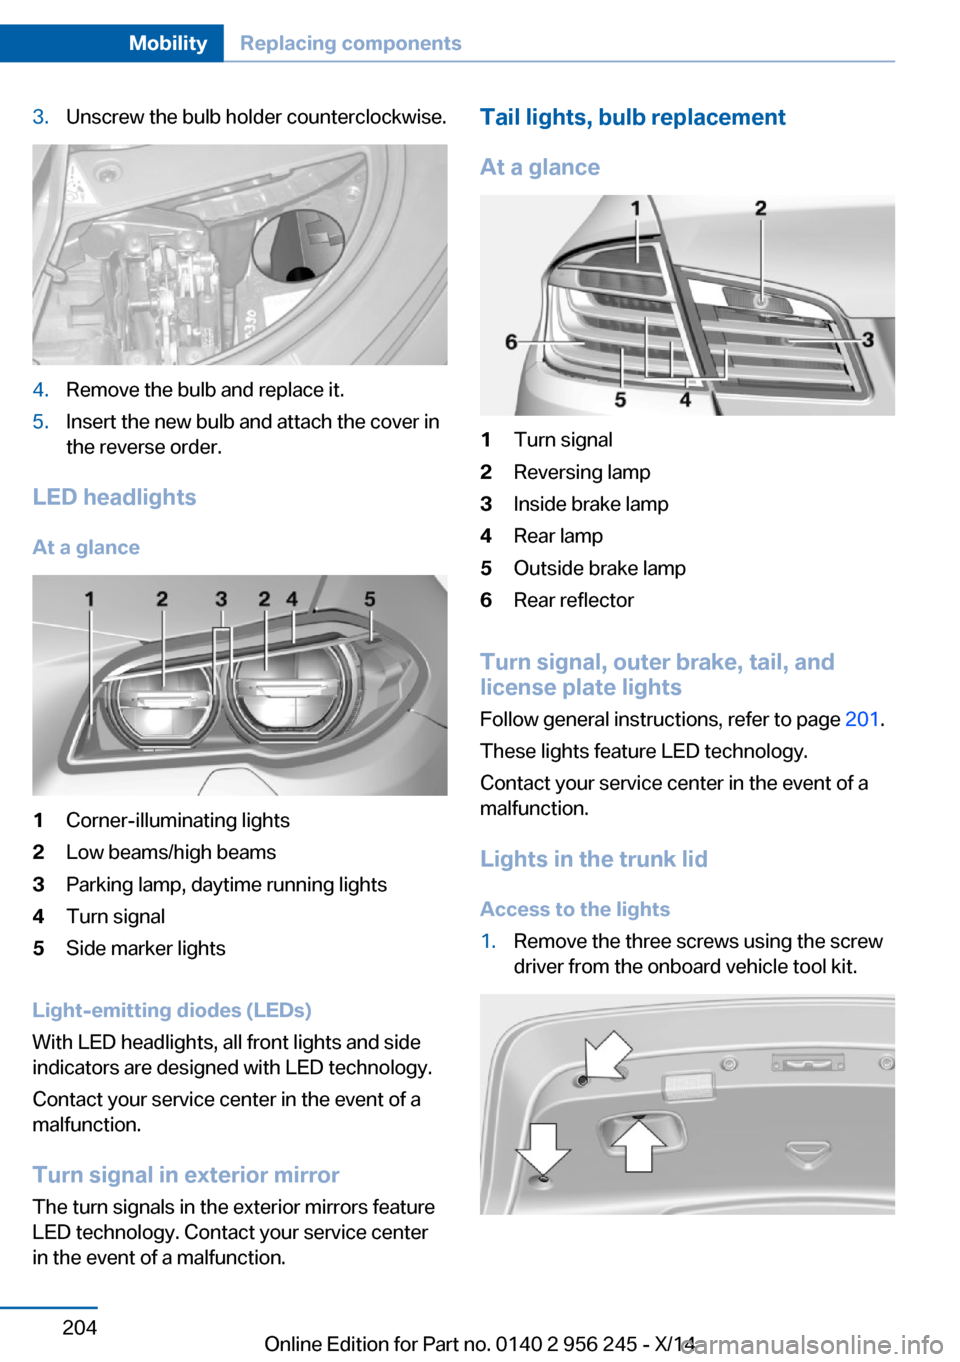 BMW M5 2014 F10M Owners Manual 3.Unscrew the bulb holder counterclockwise.4.Remove the bulb and replace it.5.Insert the new bulb and attach the cover in
the reverse order.
LED headlights
At a glance
1Corner-illuminating lights2Low 